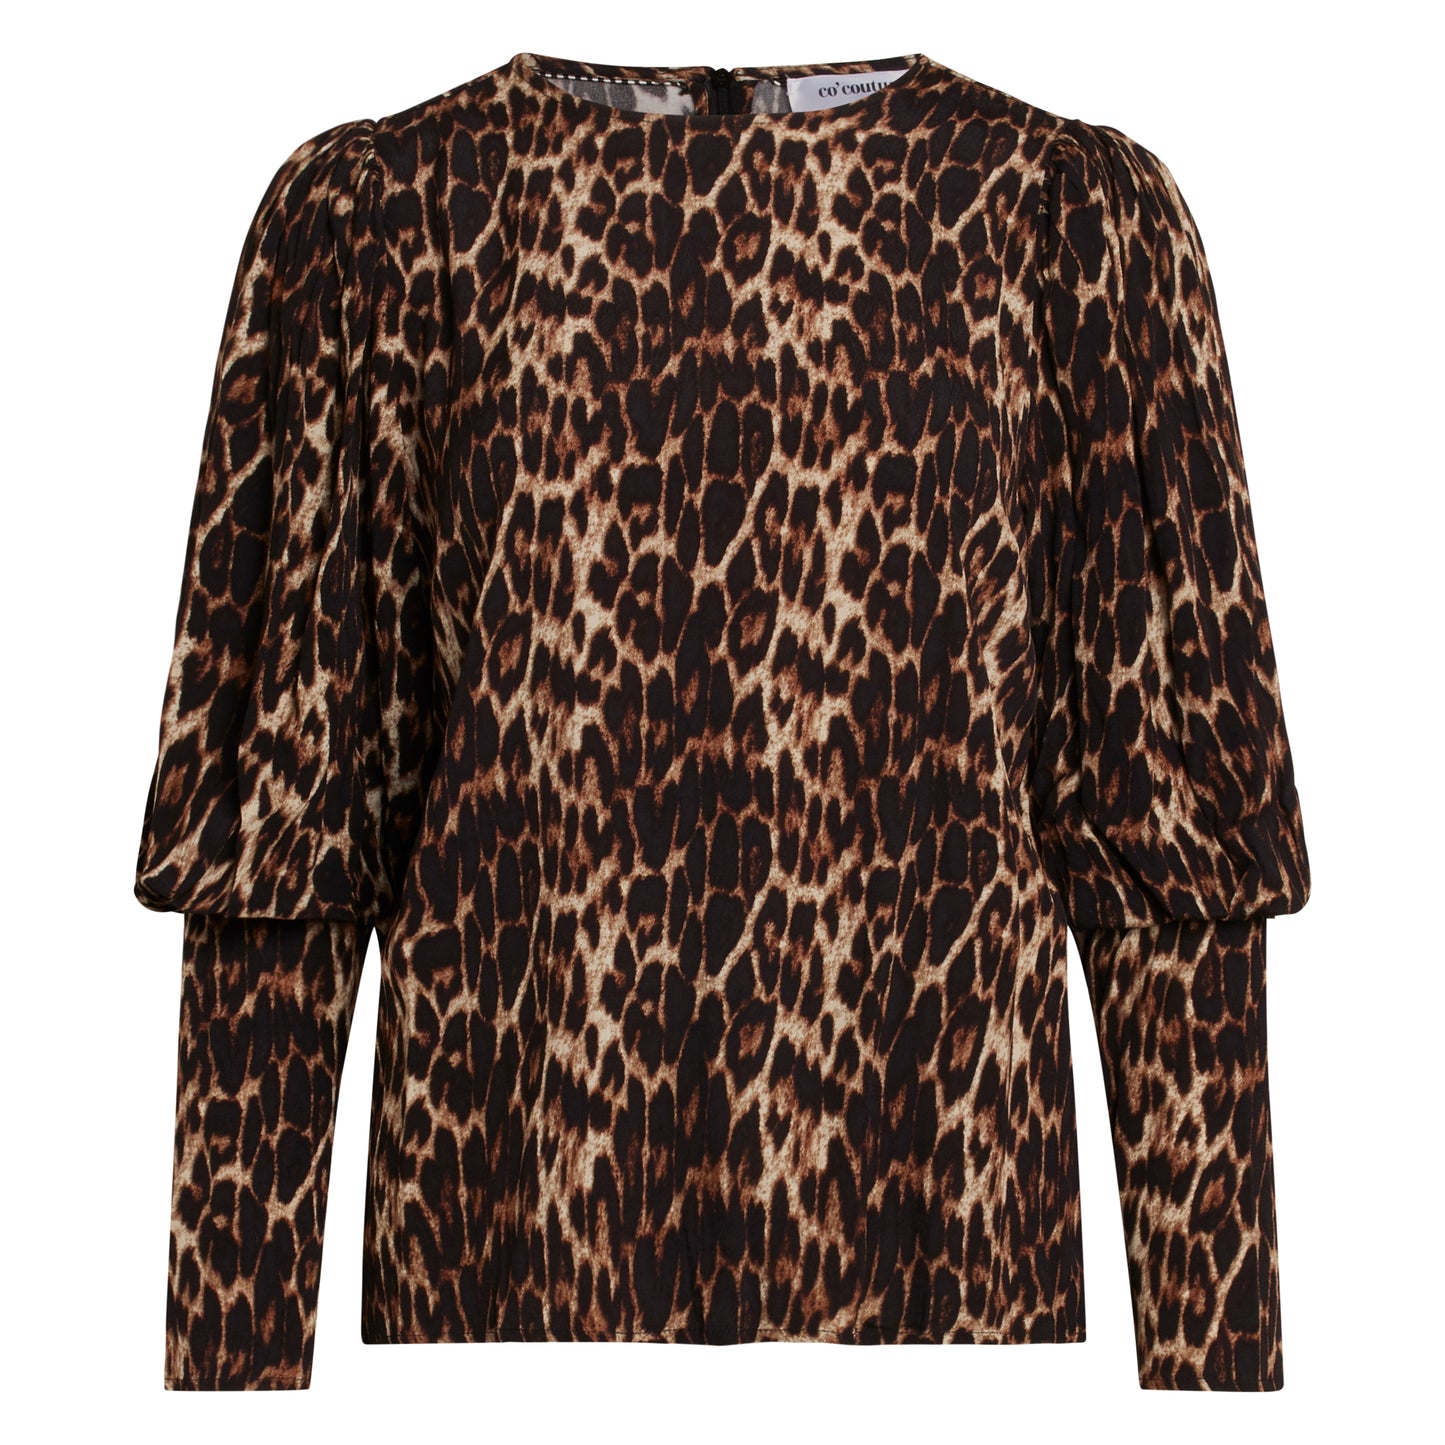 Co'couture - Nabia Bluse - Leopard